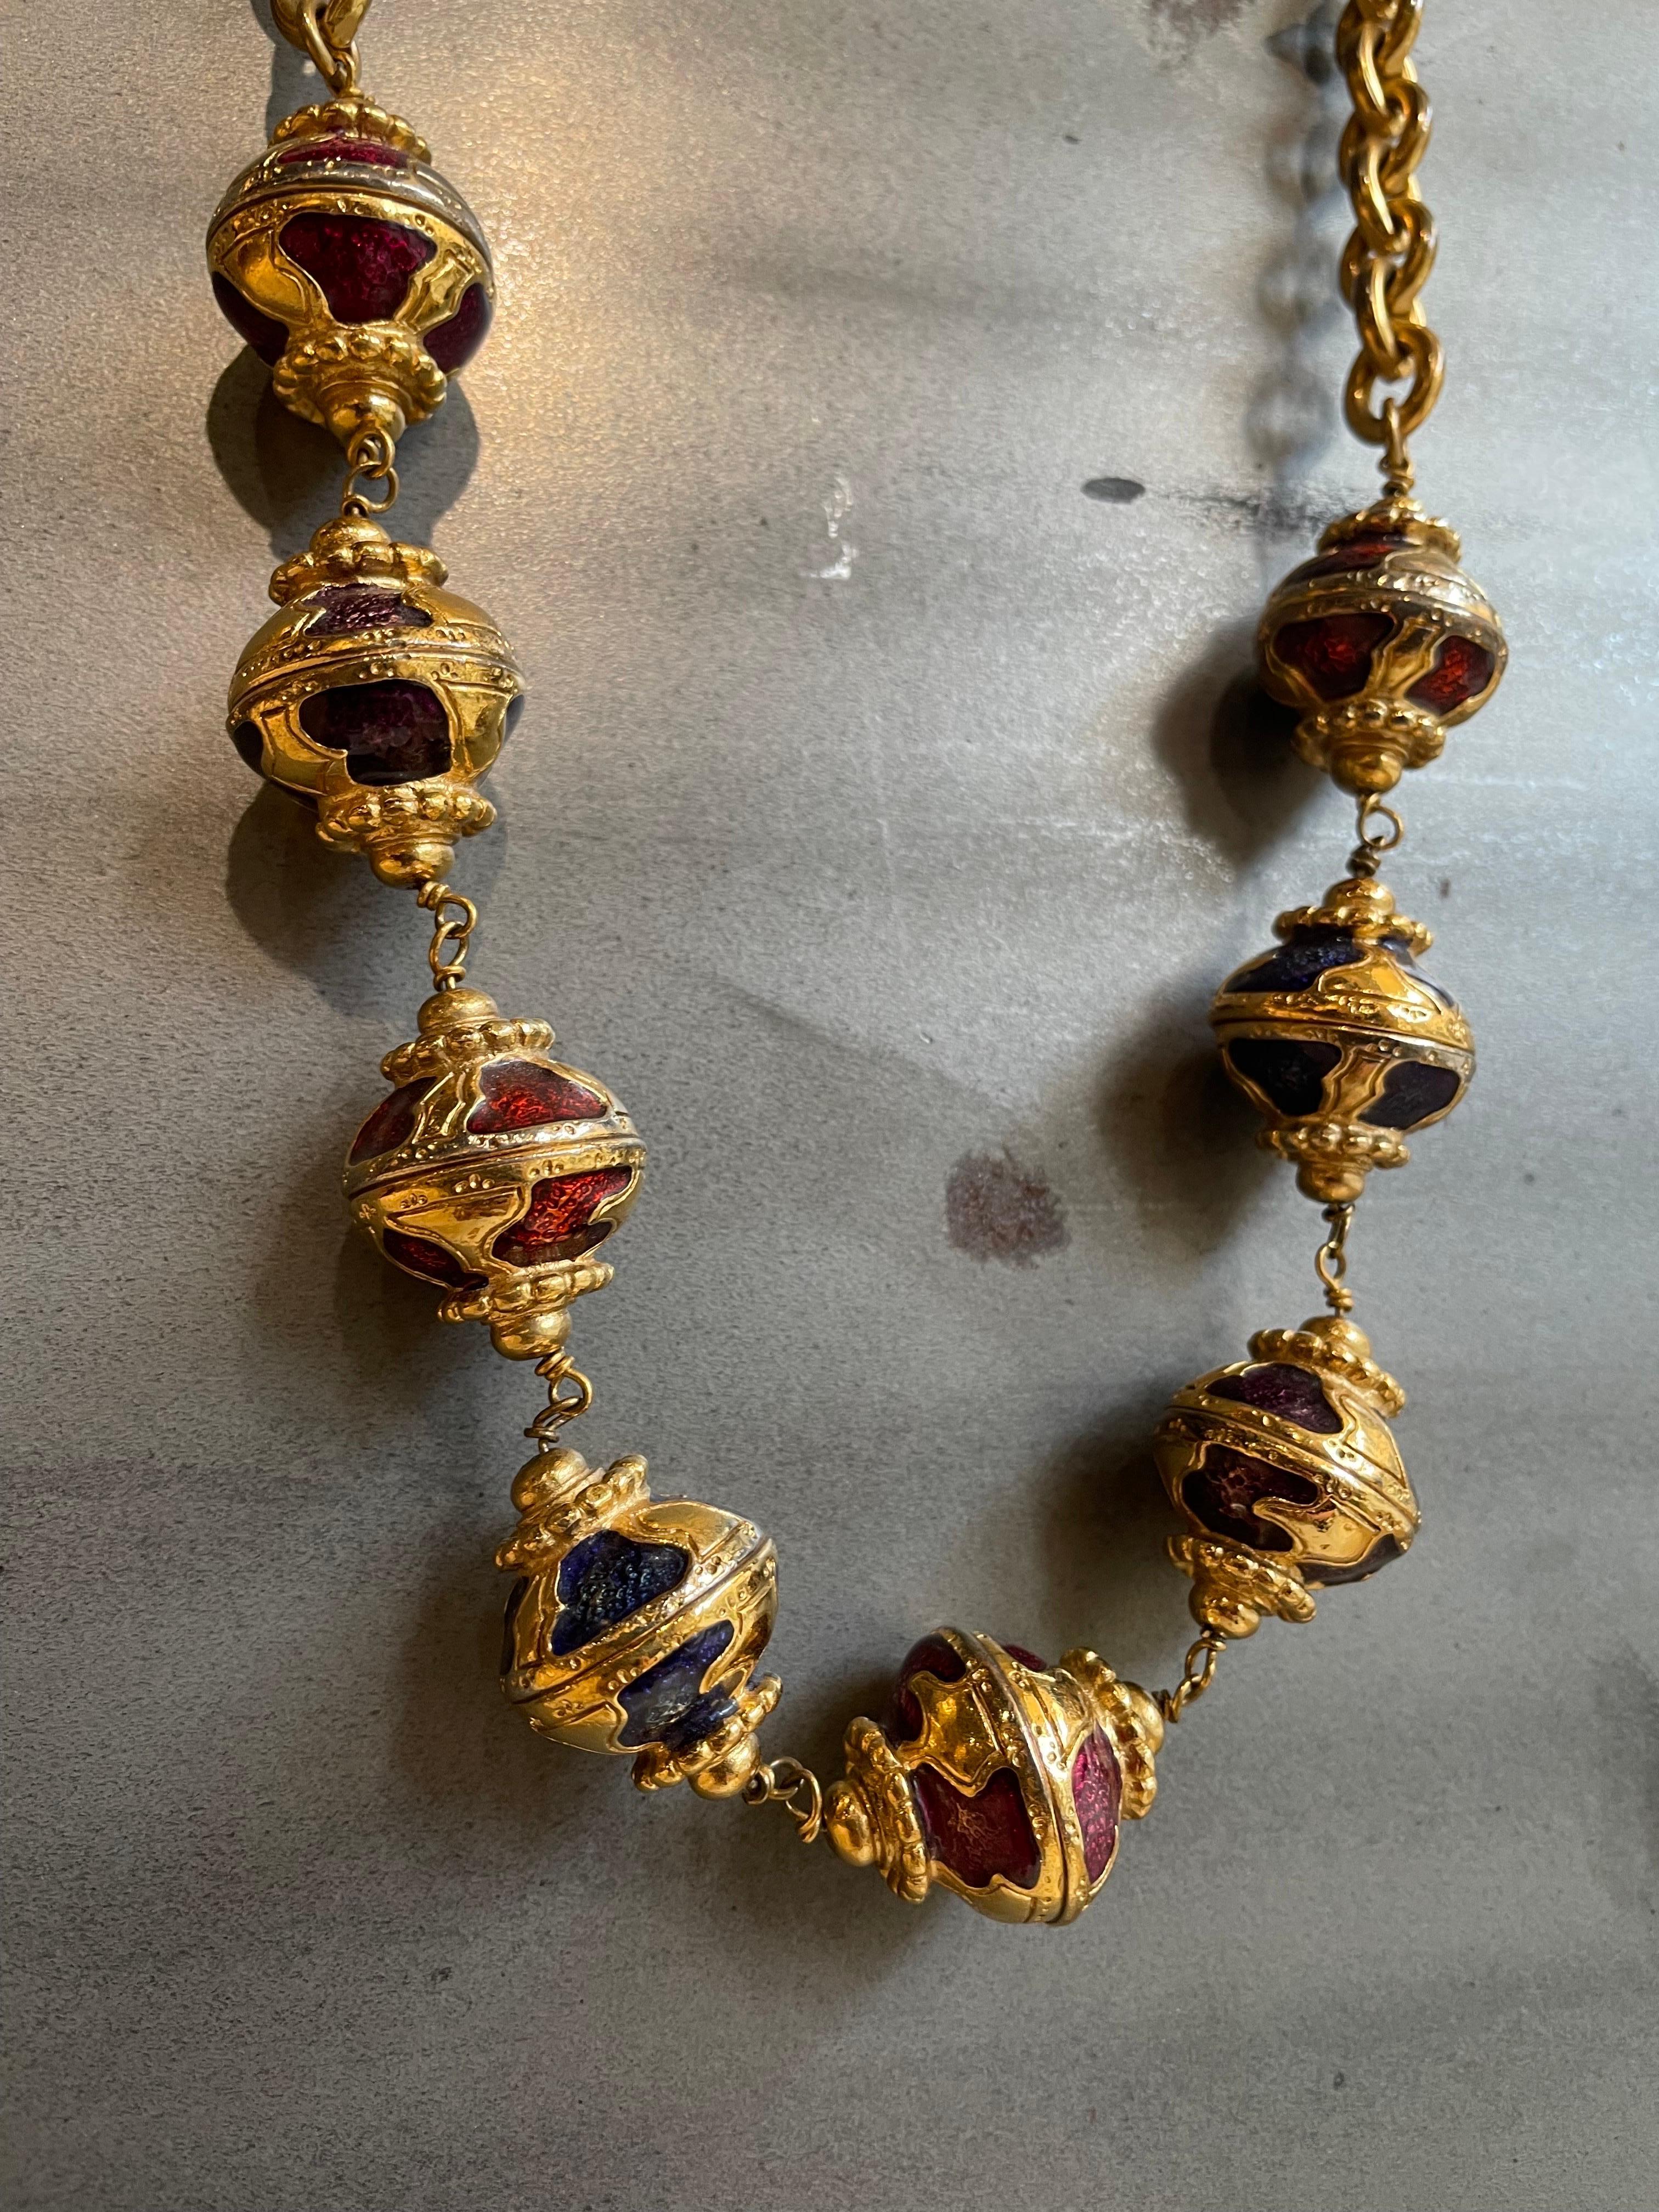 Yves Saint Laurent necklace year 1976 Russian period. Made of gilded metal with enamelled charms in various colours. 
Adjustable closure on 3 different lengths. Held very well only in some places, the gilding has faded as you can see from the